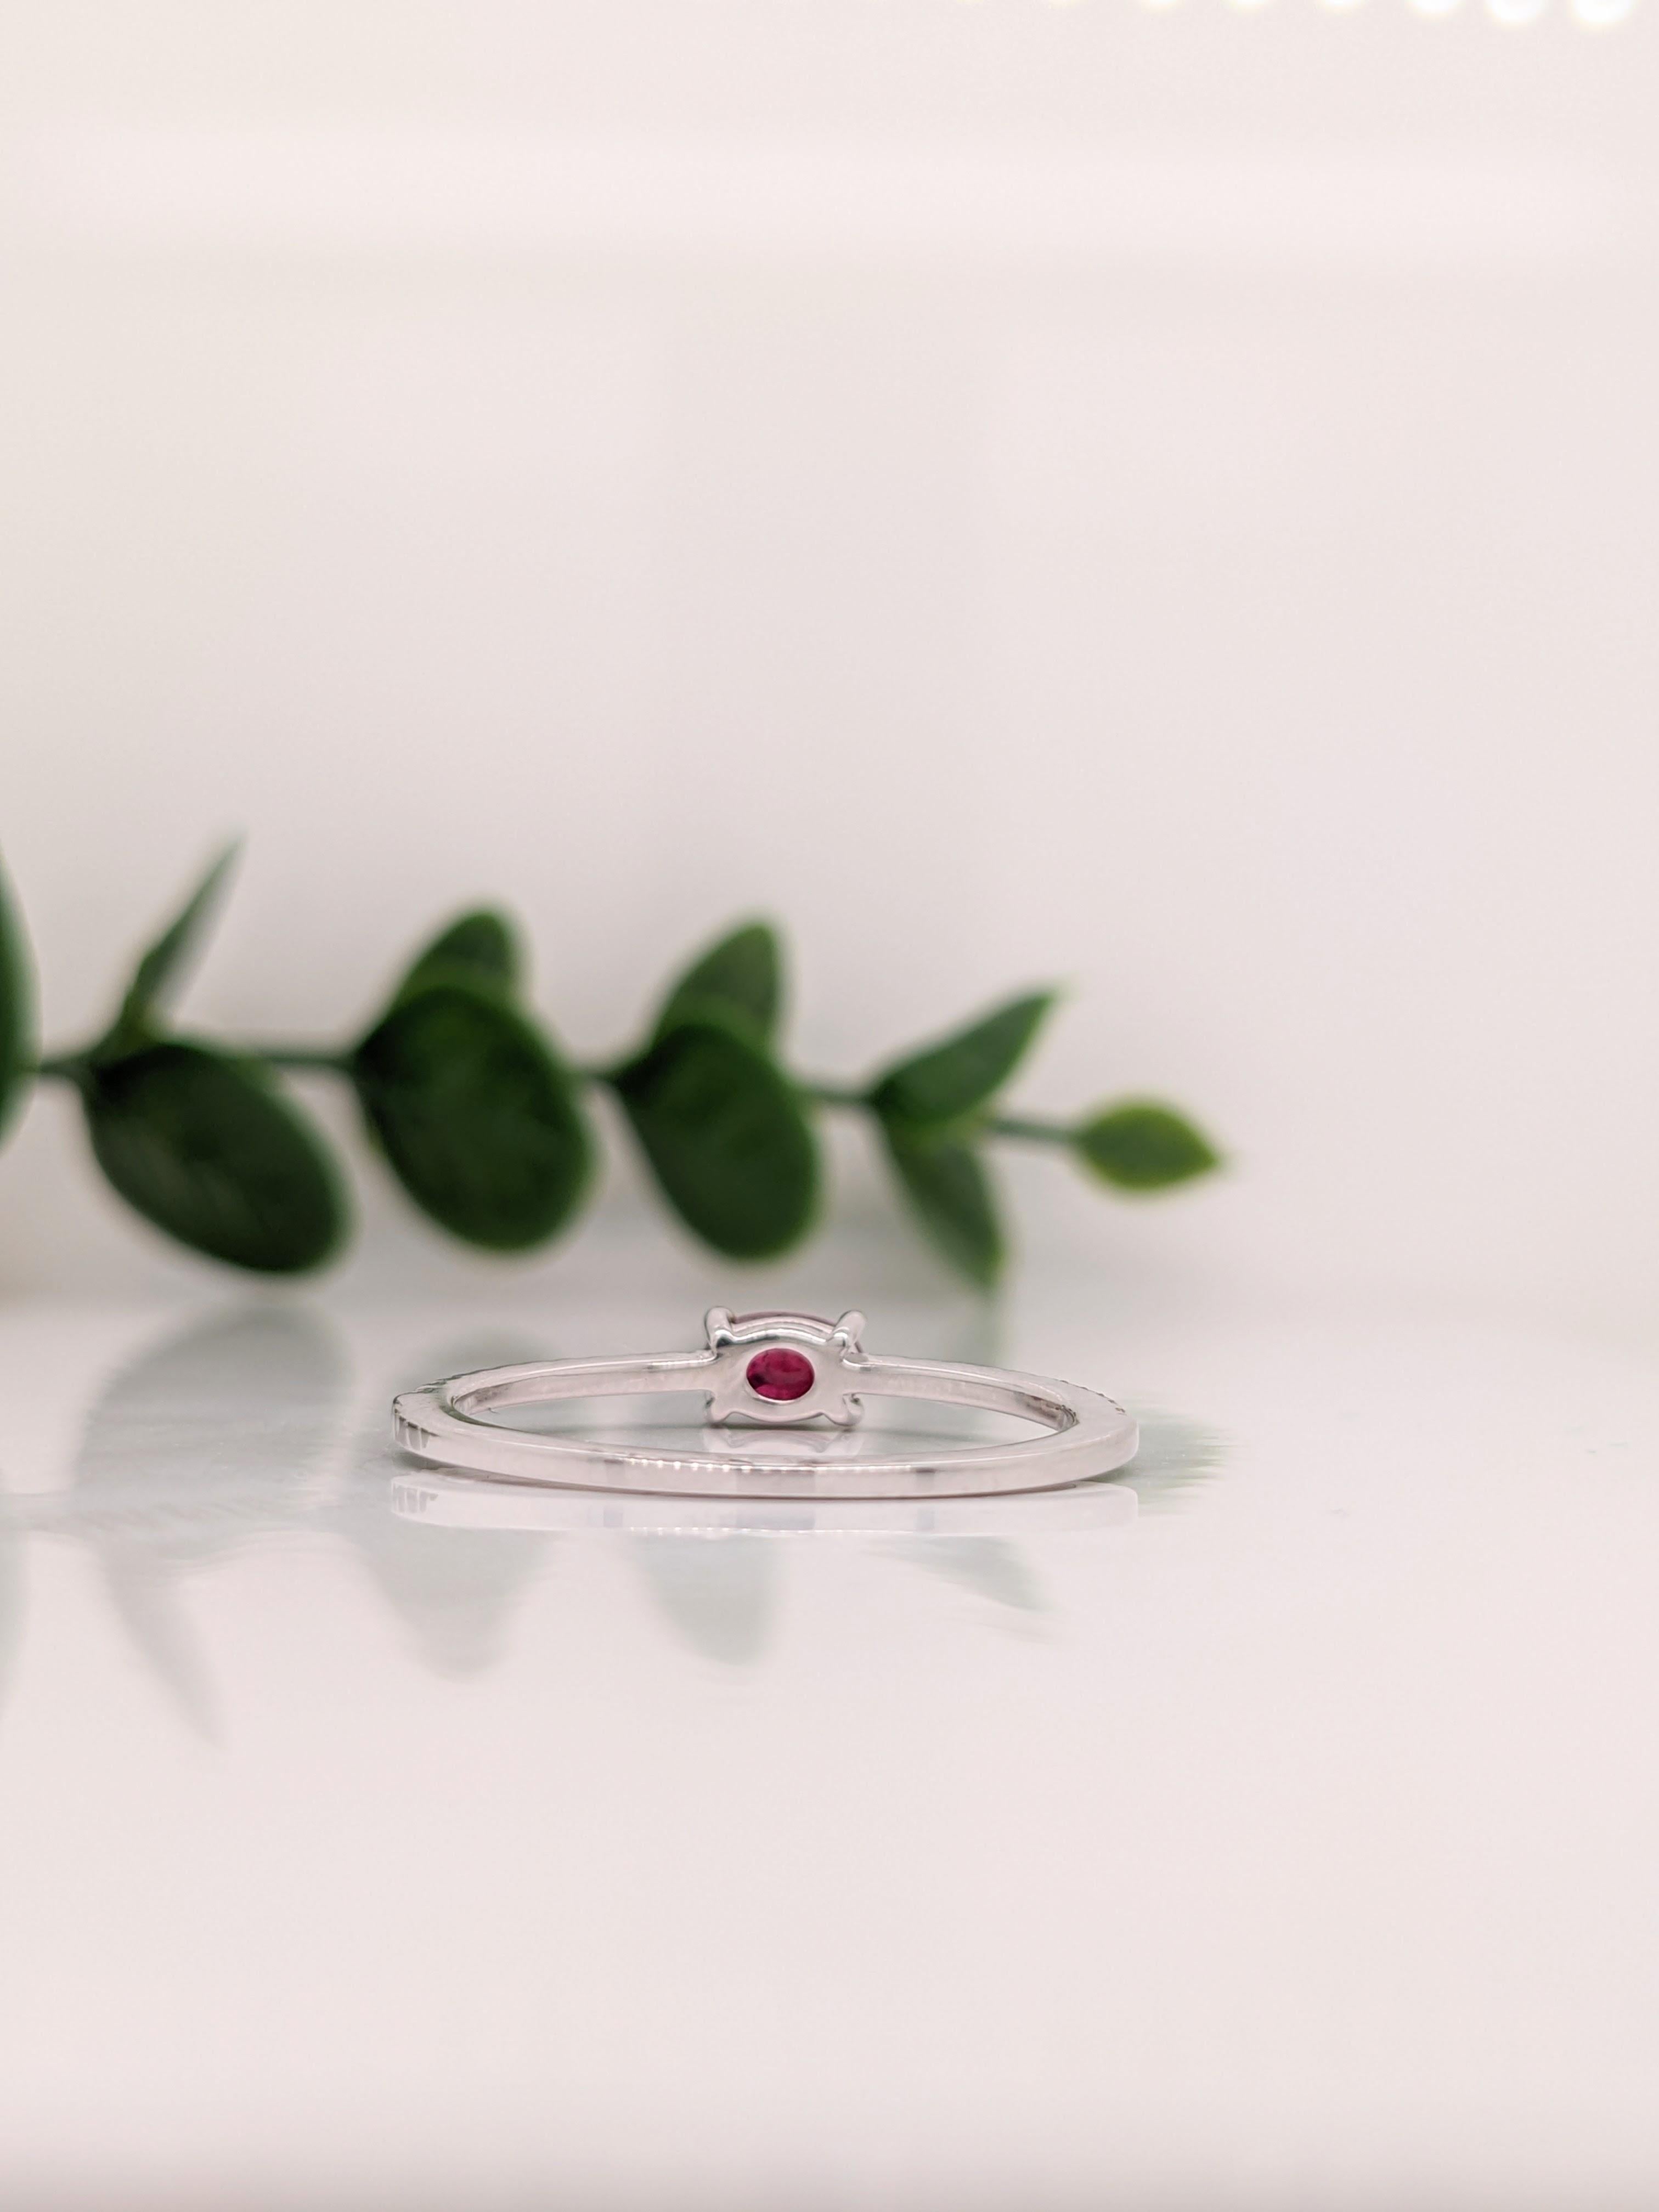 Oval Cut Ruby Ring w Natural Pave Diamond Shank in 14K White Gold East West Oval 5x4mm For Sale